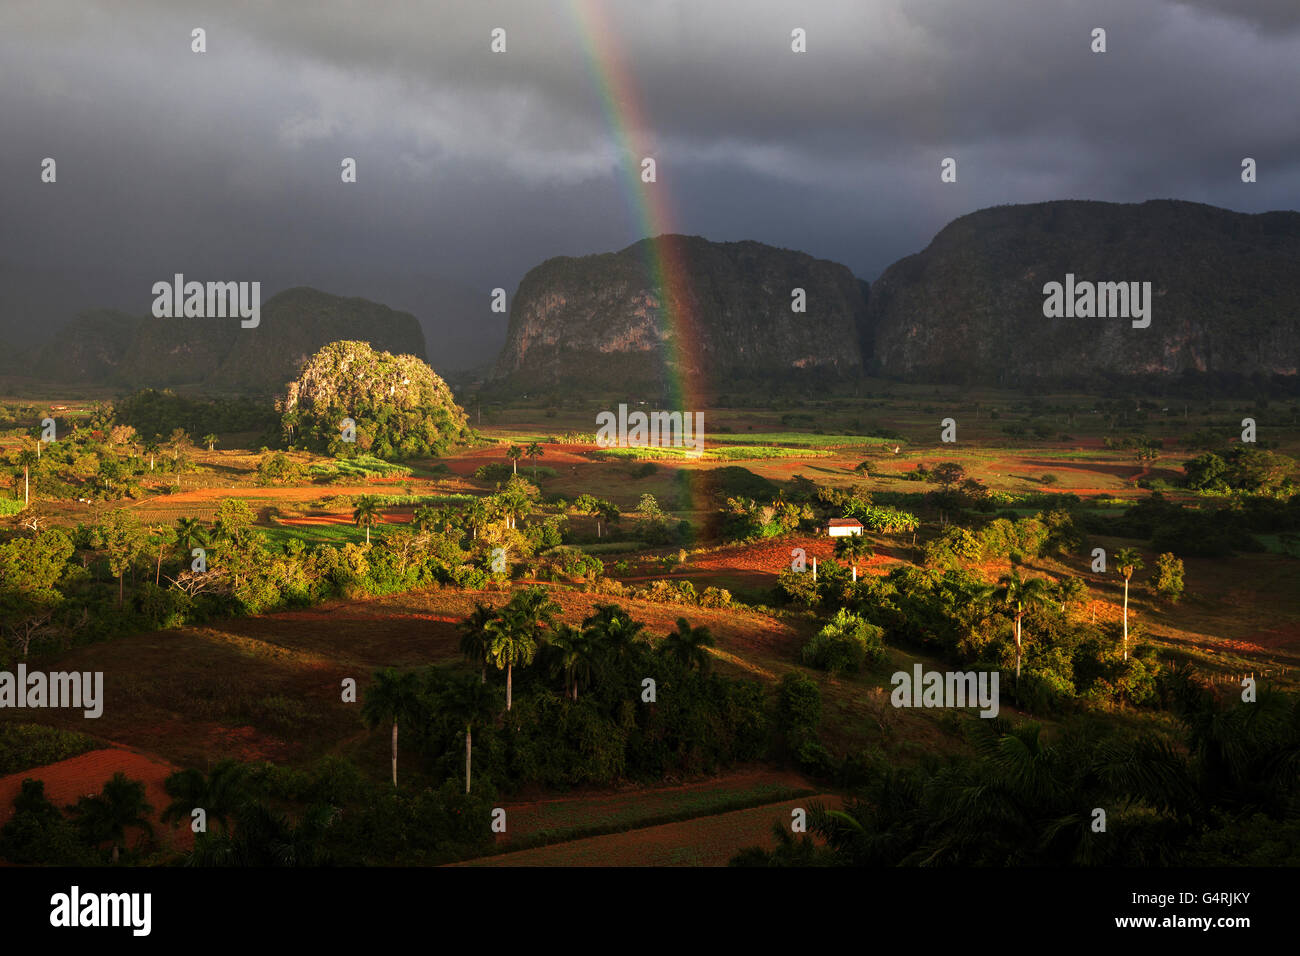 Tobacco growing area, view of the Vinales Valley, in the background karst cones called mogotes, stormy atmosphere, rainbow Stock Photo